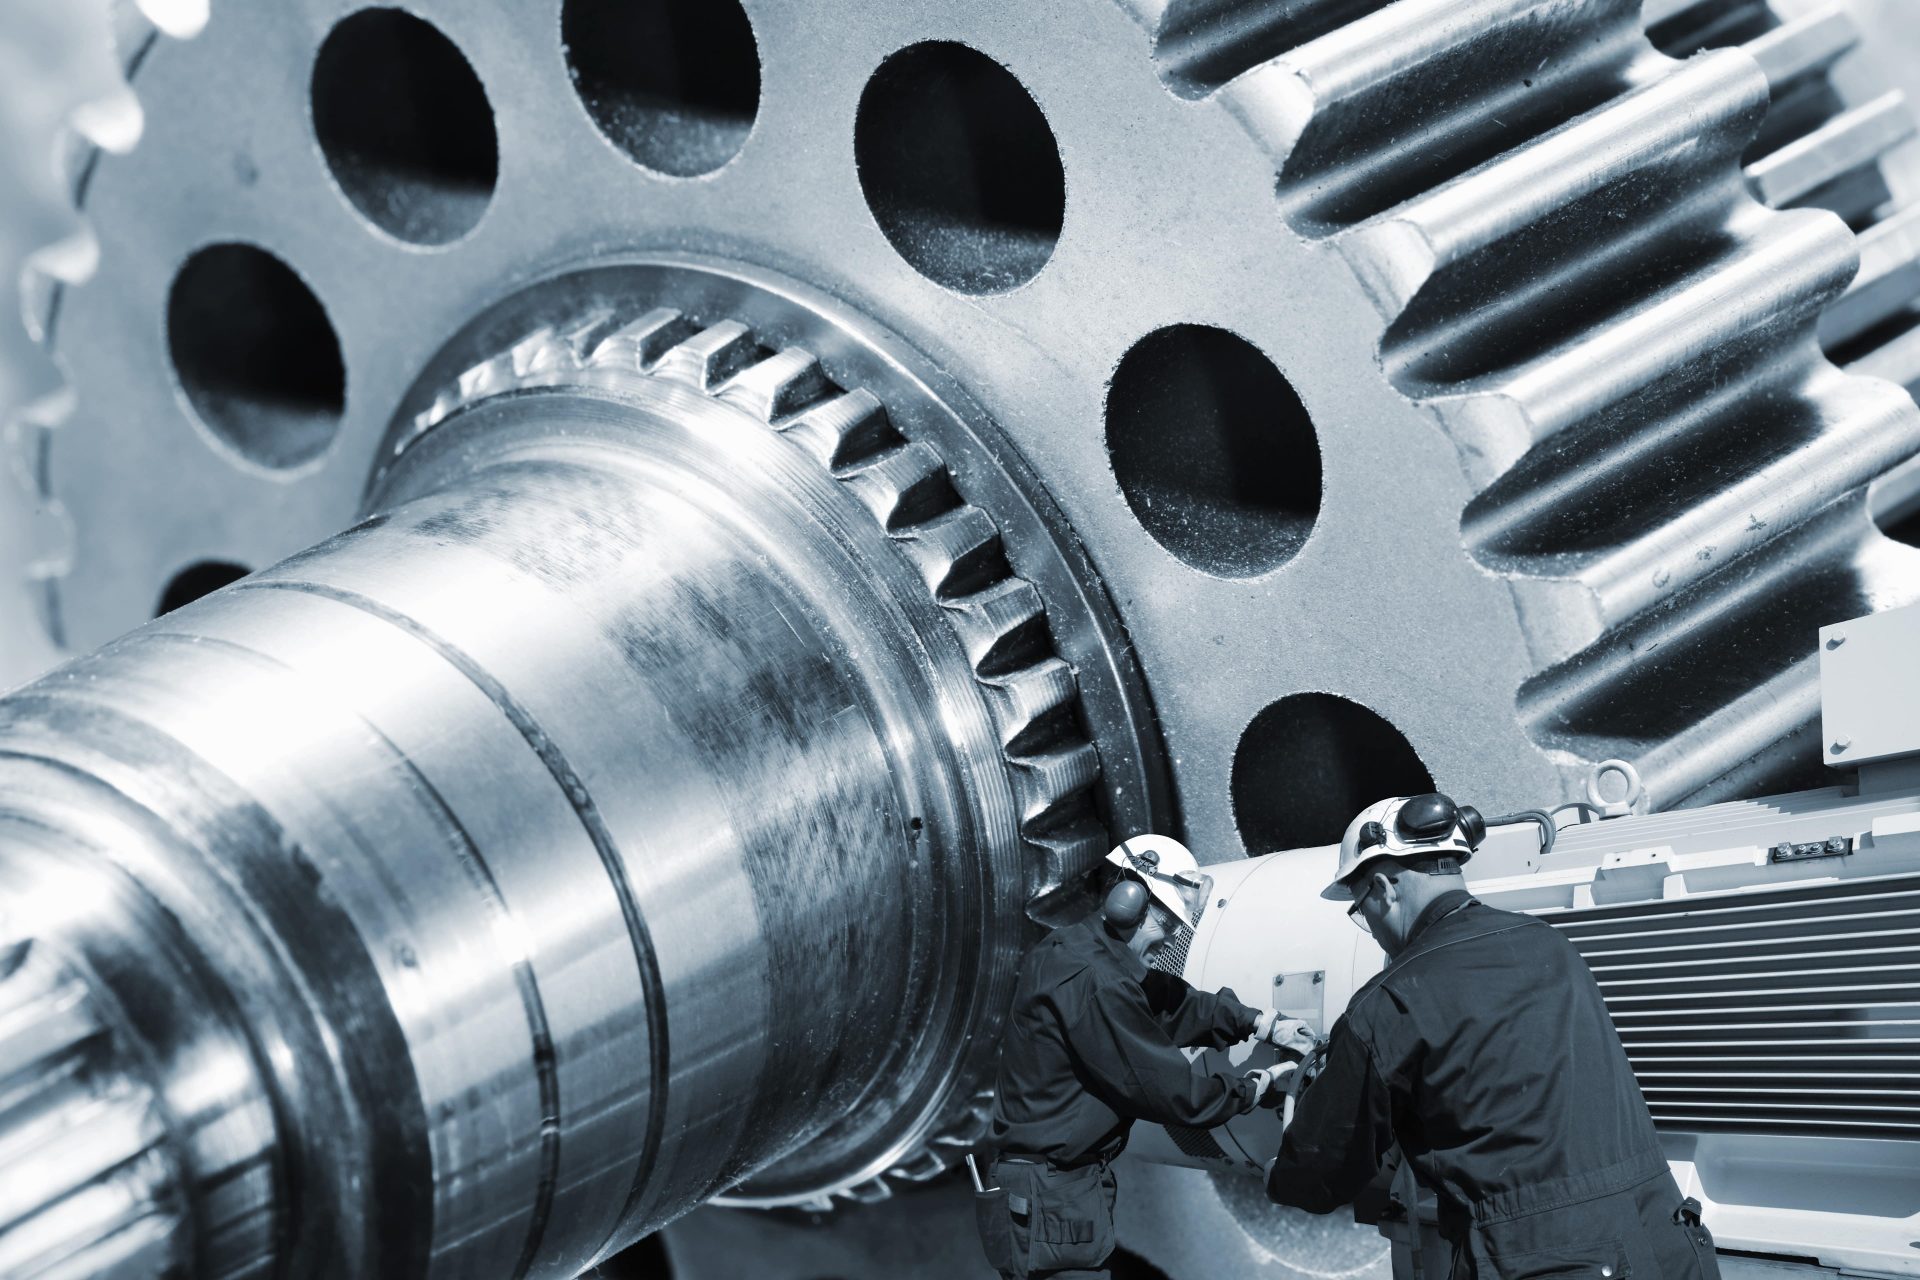 Aerospace testing with workers inspecting the gear components